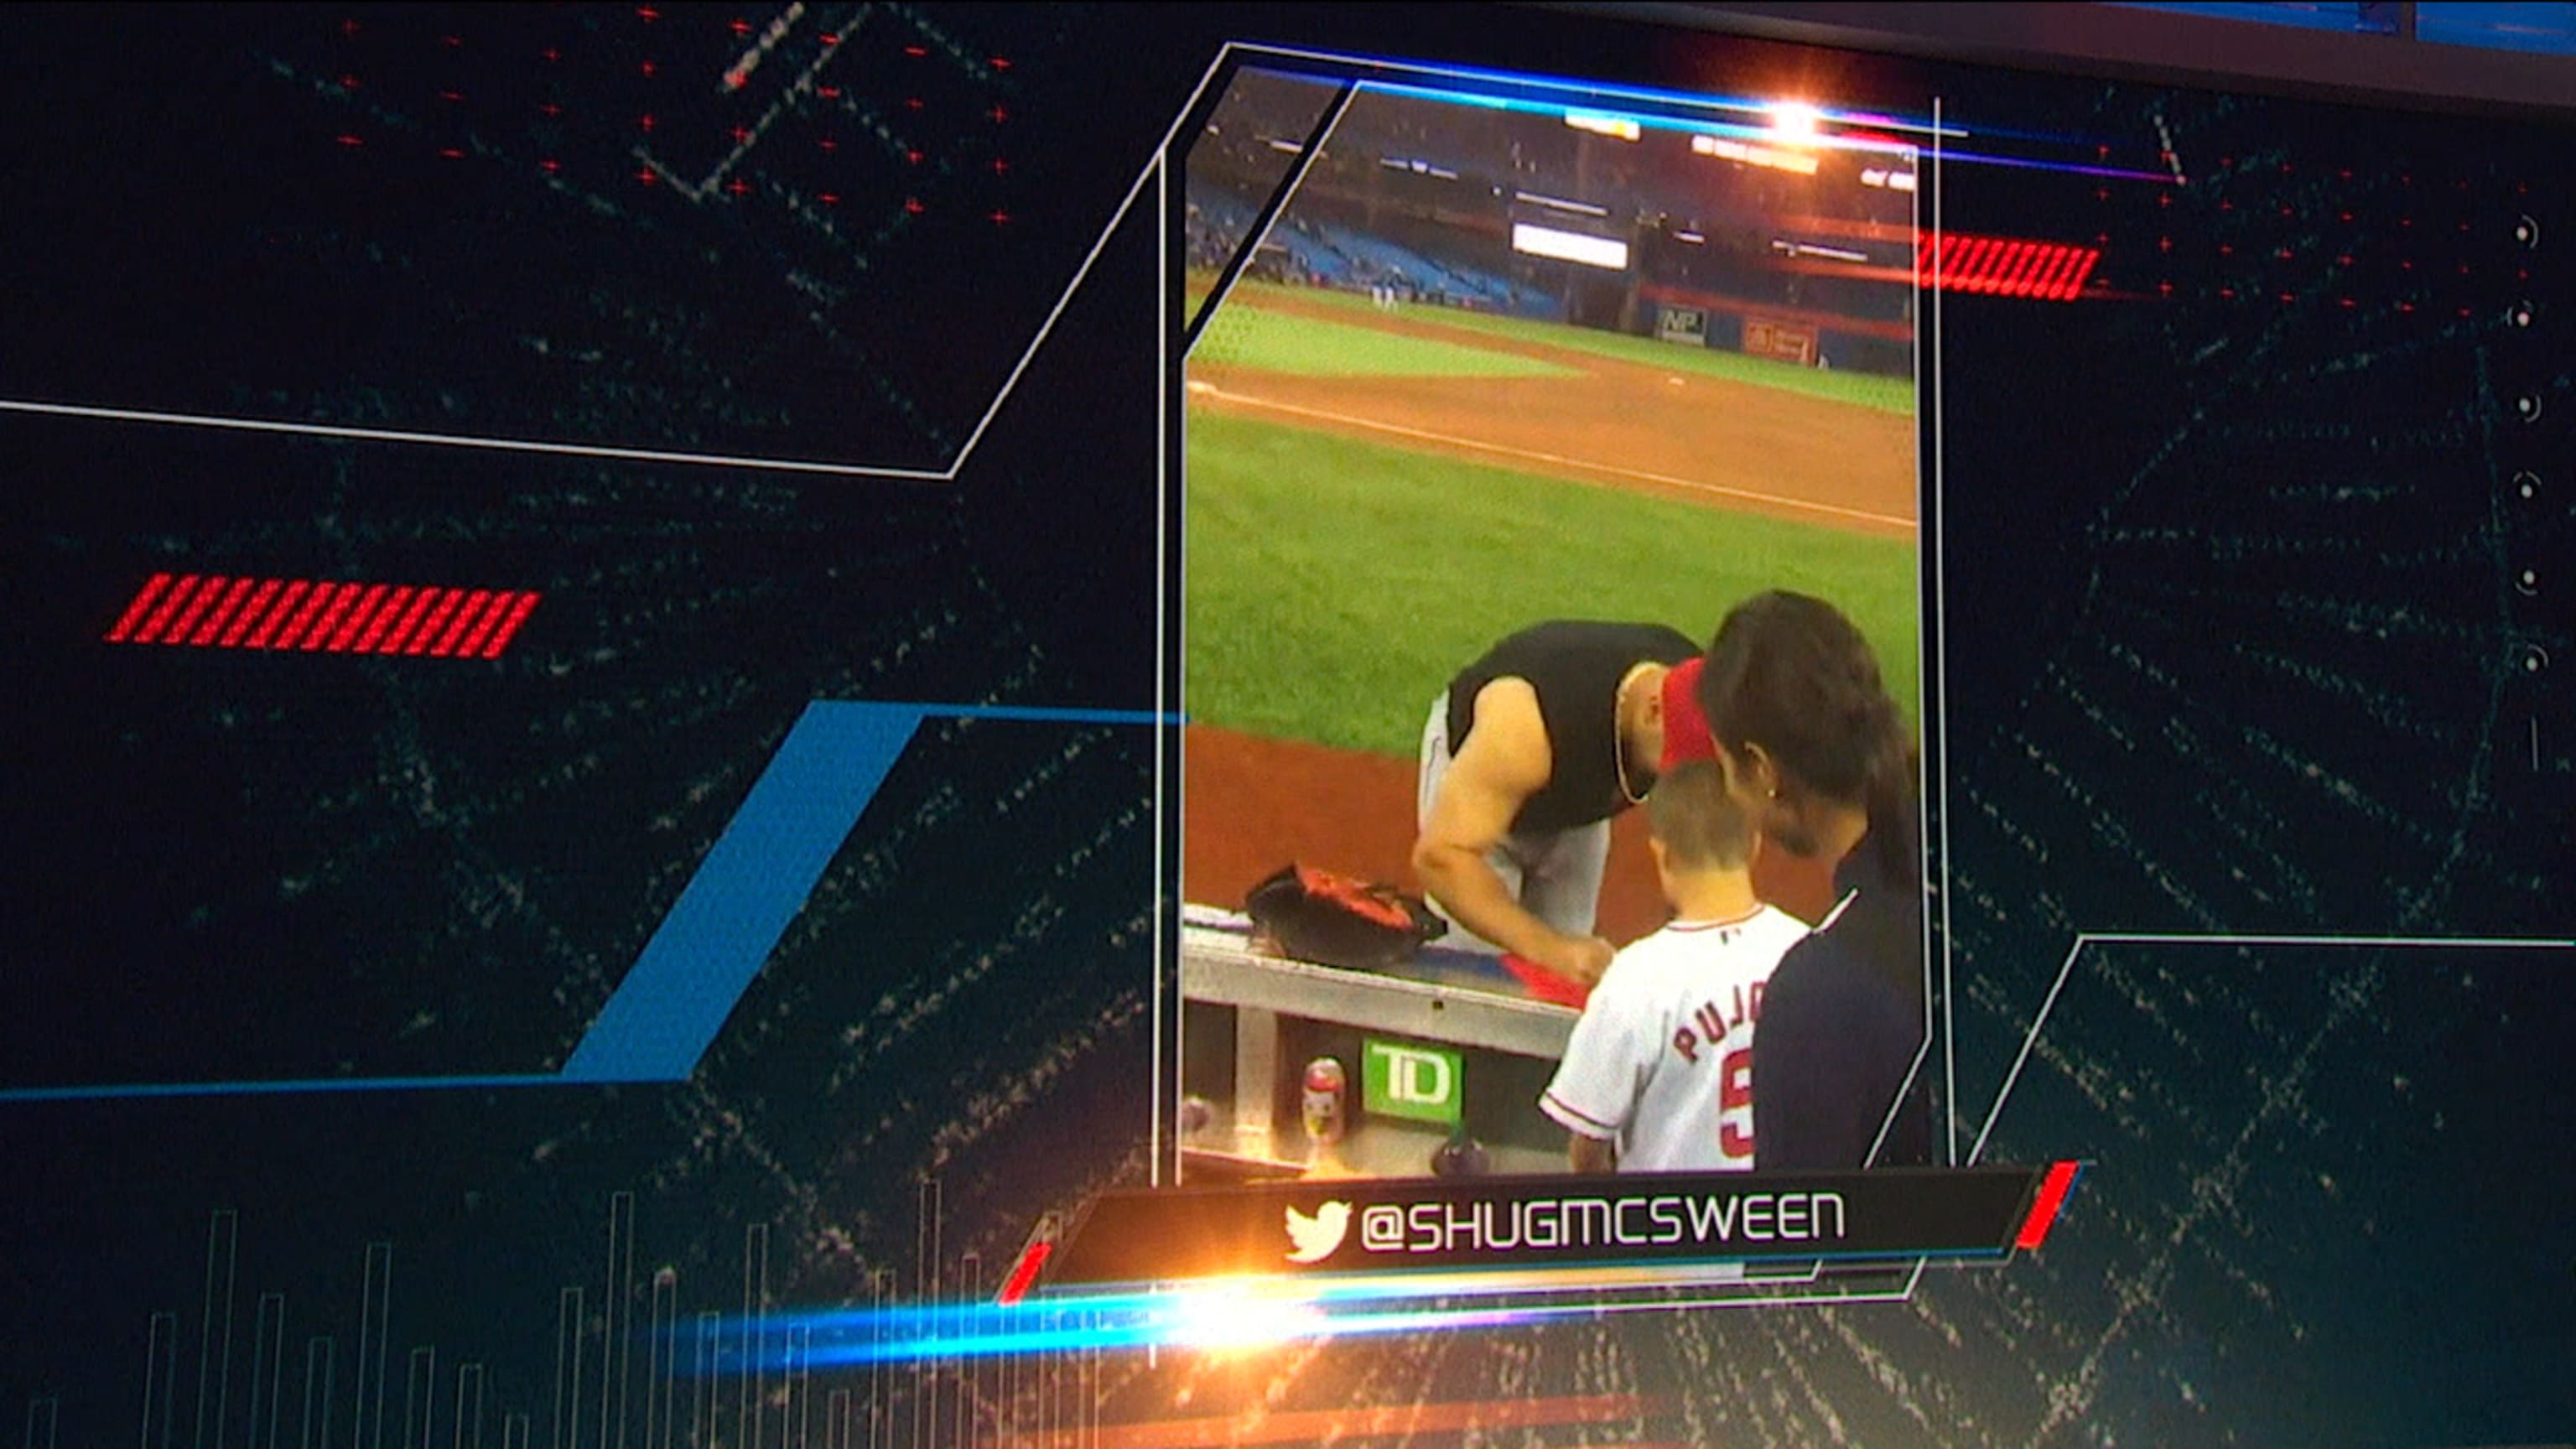 Albert Pujols gives Angles jersey to young fan after game